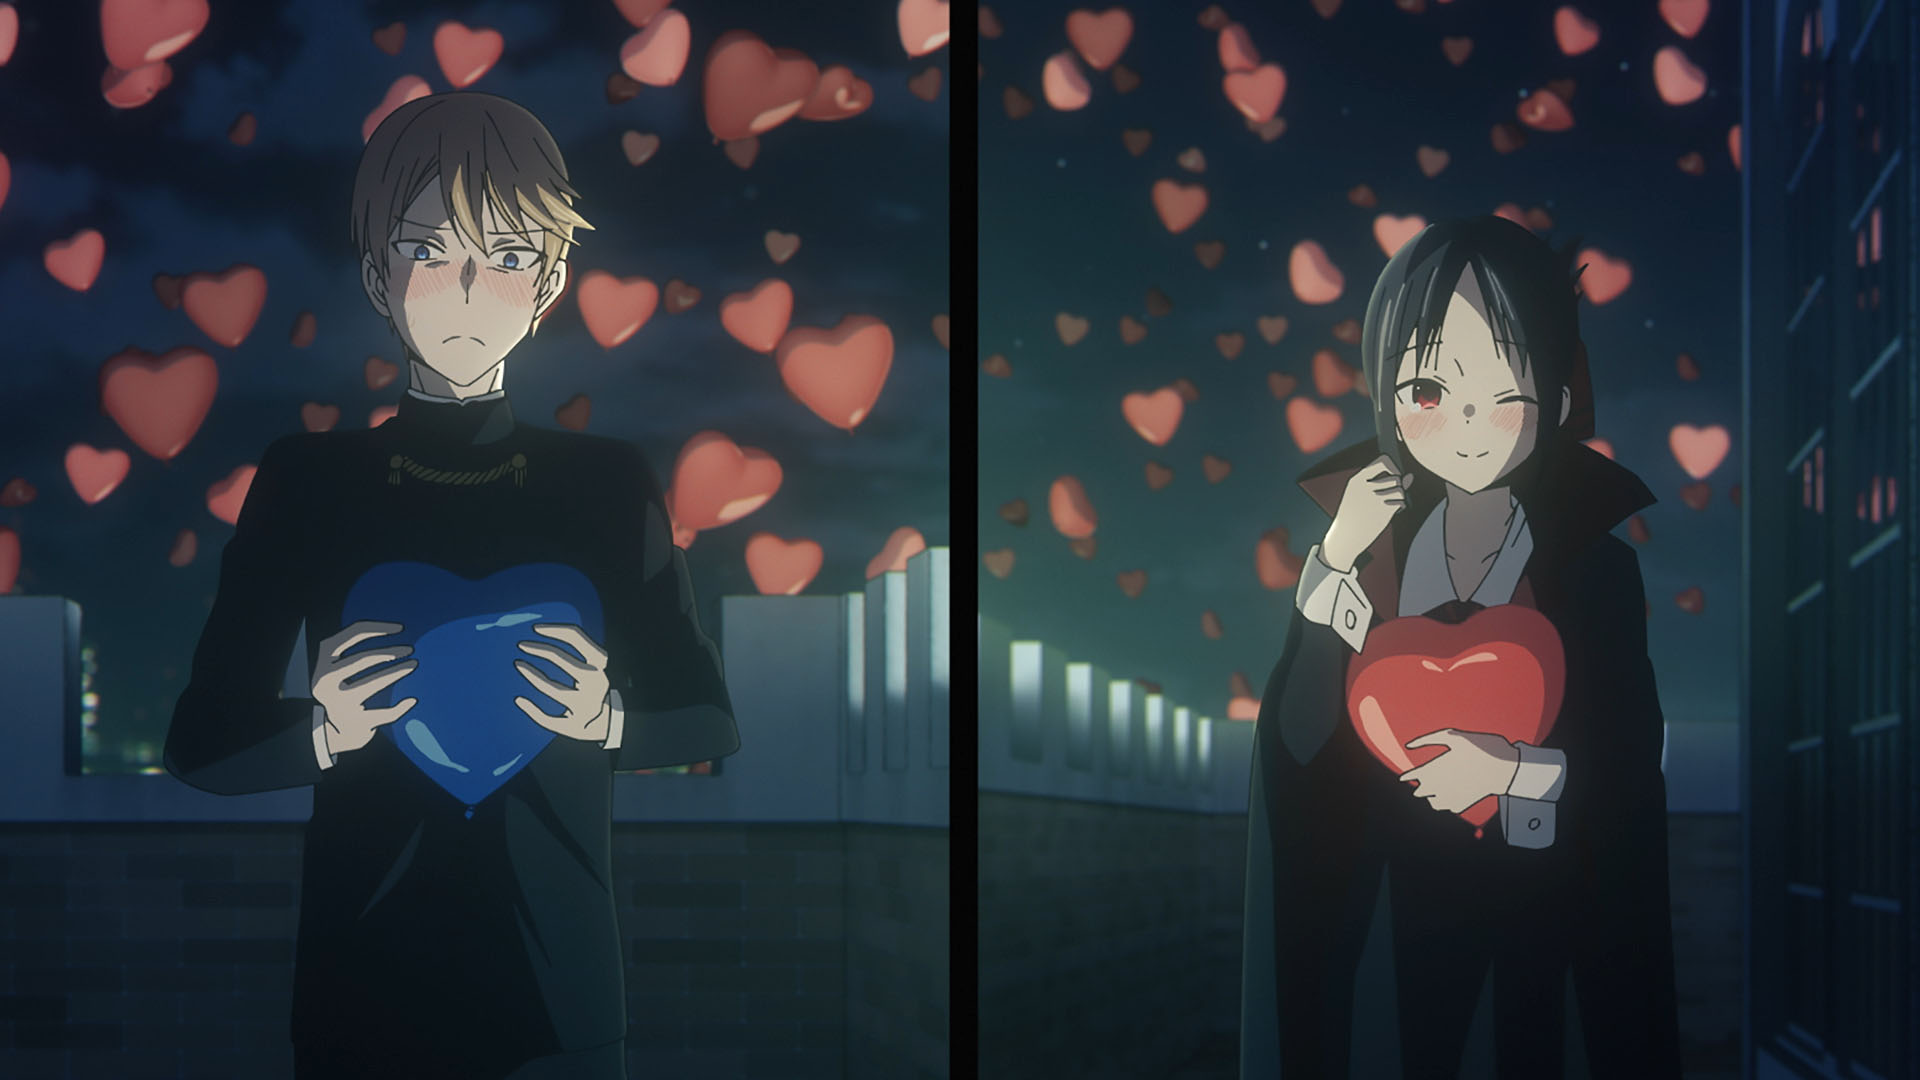 Miyoki Shirogane and Kaguya Shinomiya prepare to exchange toy hearts while heart-shaped balloons swirl all around them on a romantic evening in a scene from the Kaguya-sama: Love is War -The First Kiss Never Ends- theatrical anime film.